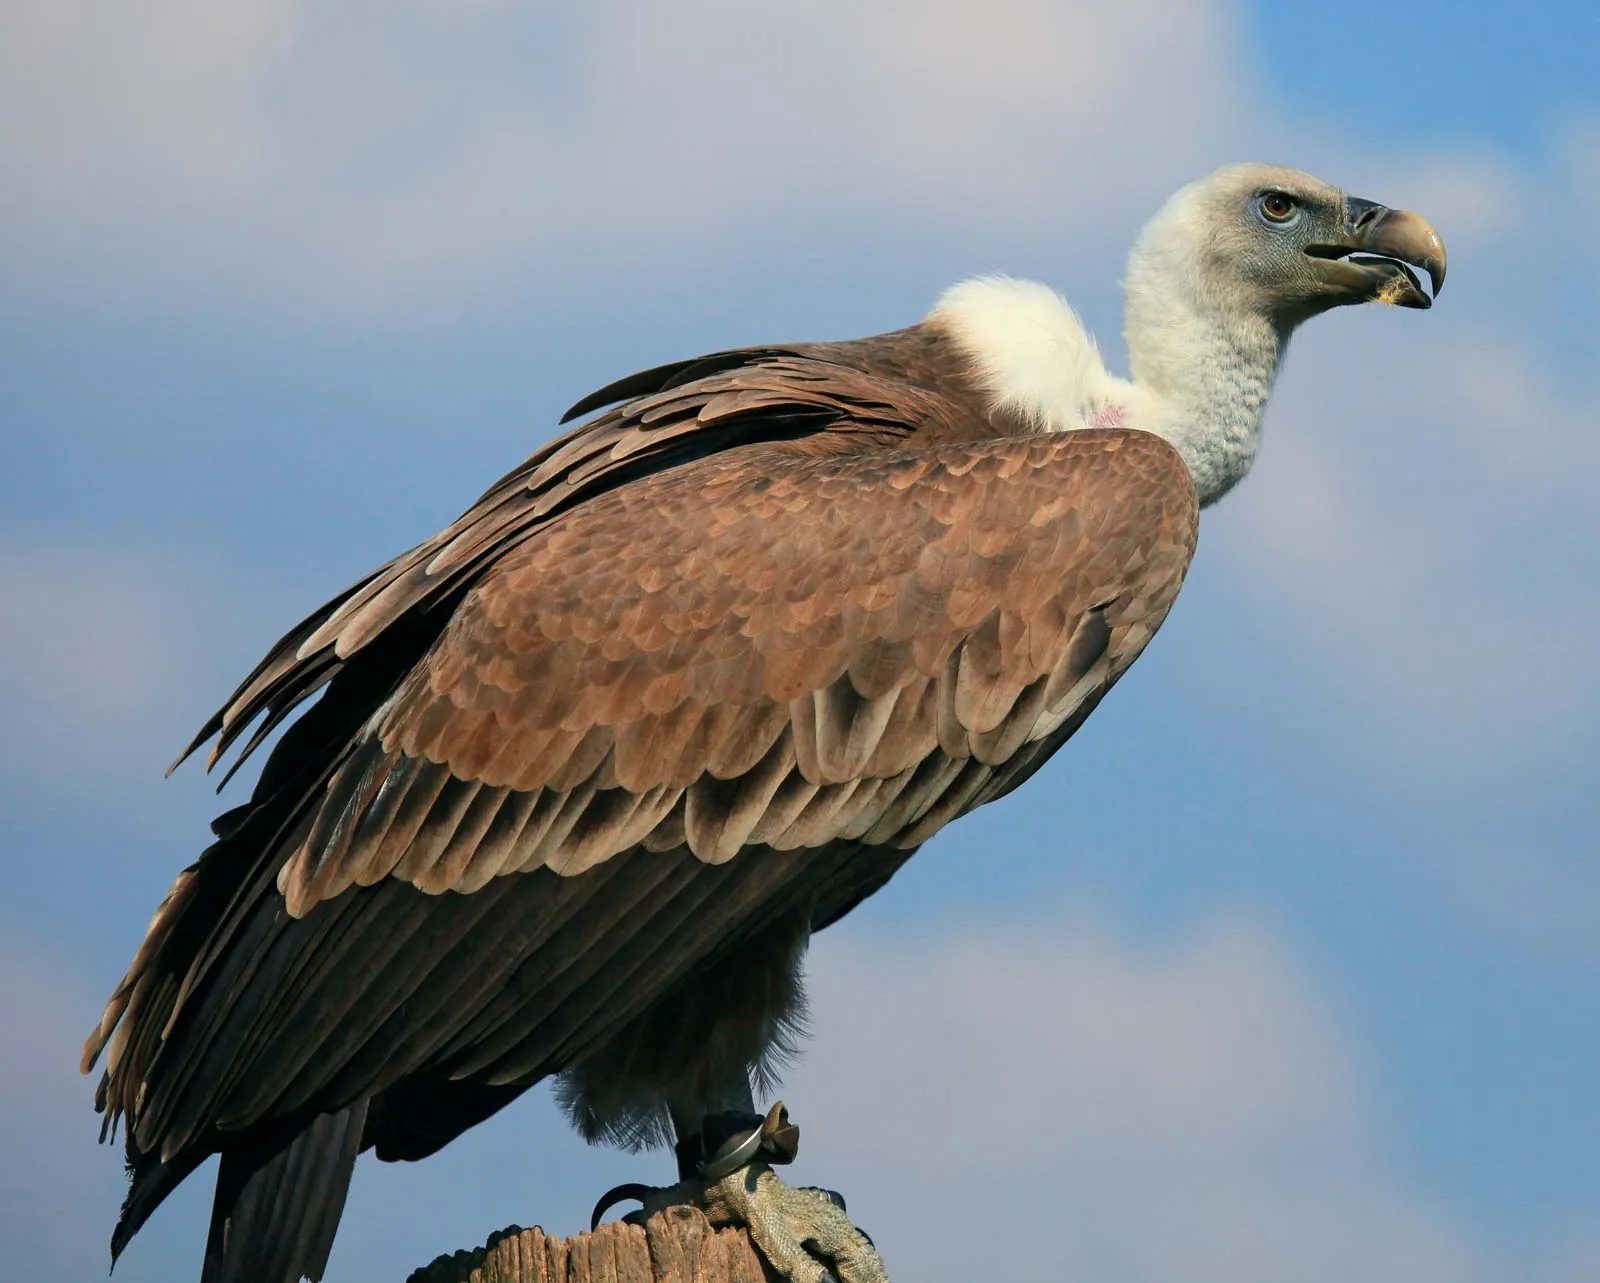 387 vultures found in Pokhara and surrounding areas